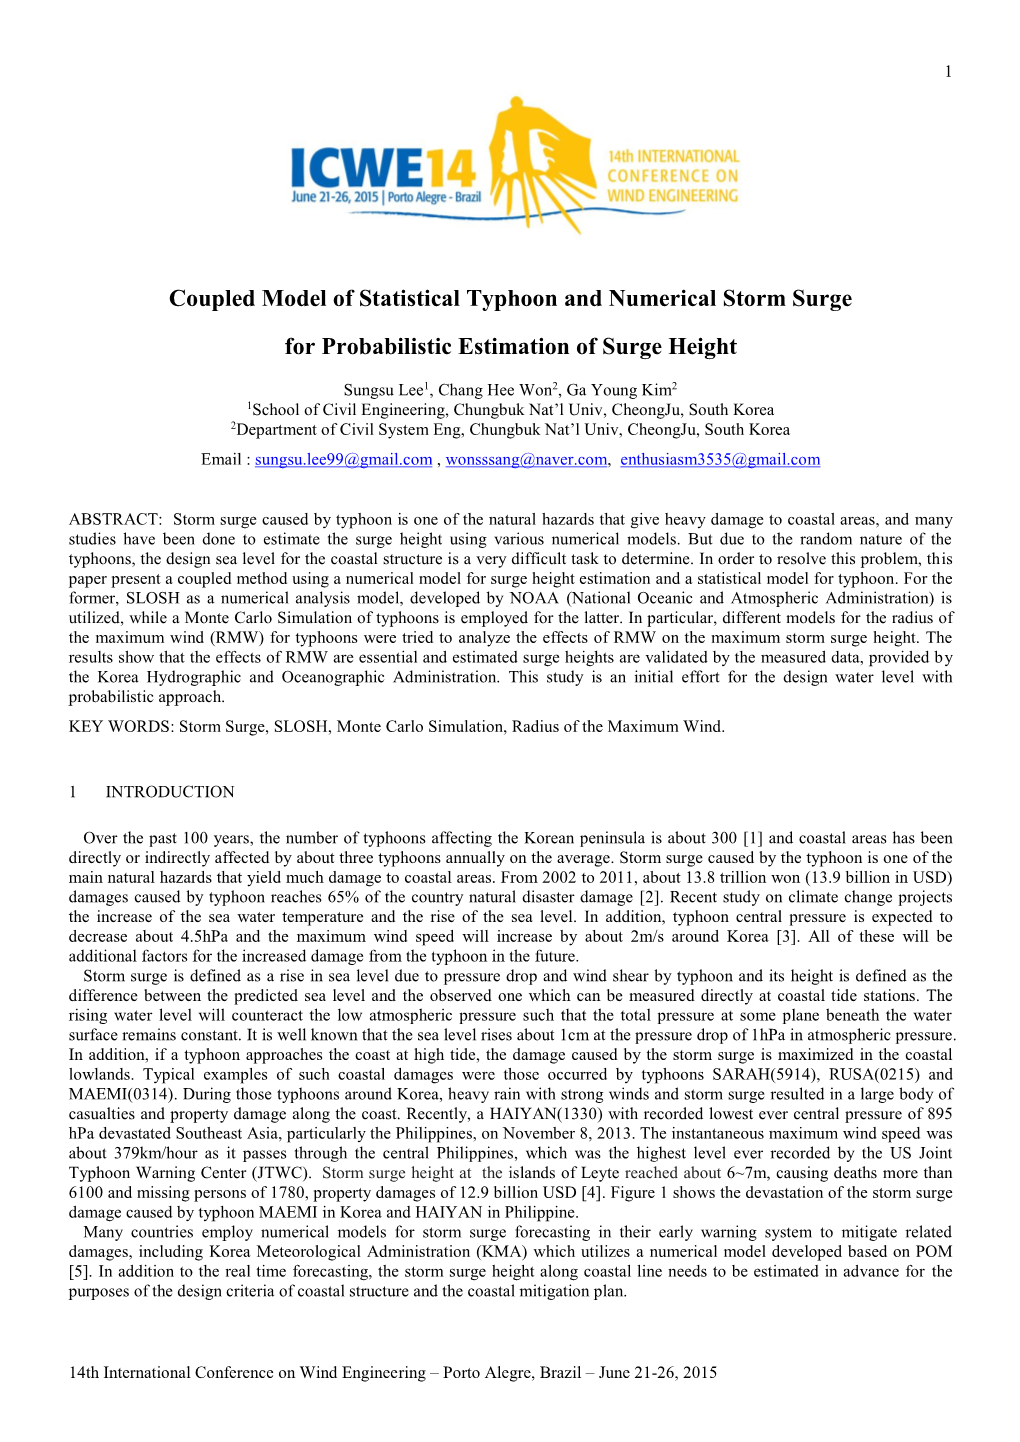 Coupled Model of Statistical Typhoon and Numerical Storm Surge For